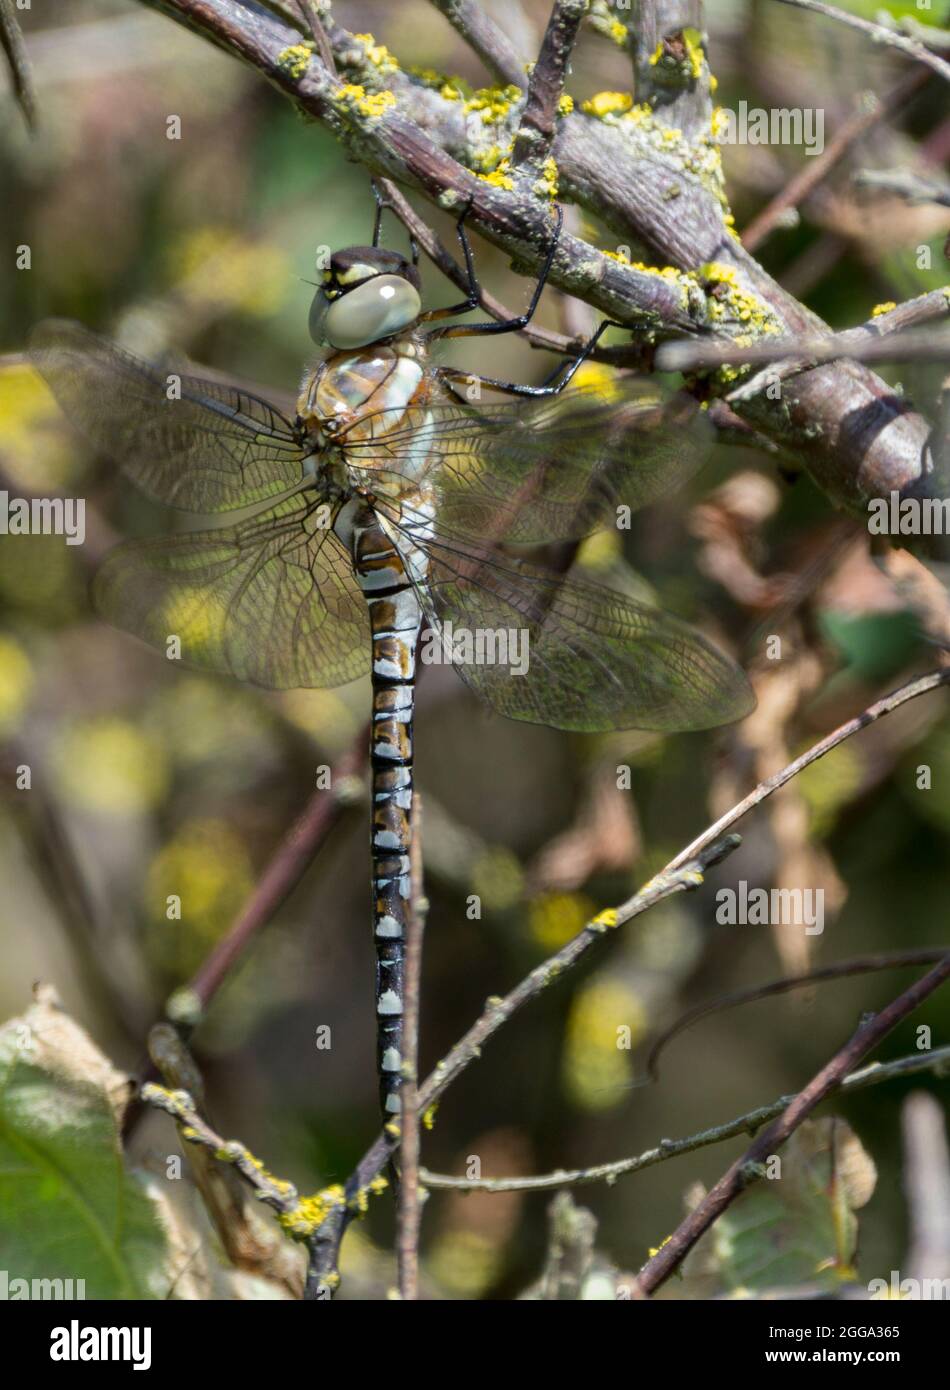 Large uk southern hawker (or similar) resting in bushes has large compound eyes together blue grey and brown colours colors black bands along abdomen Stock Photo